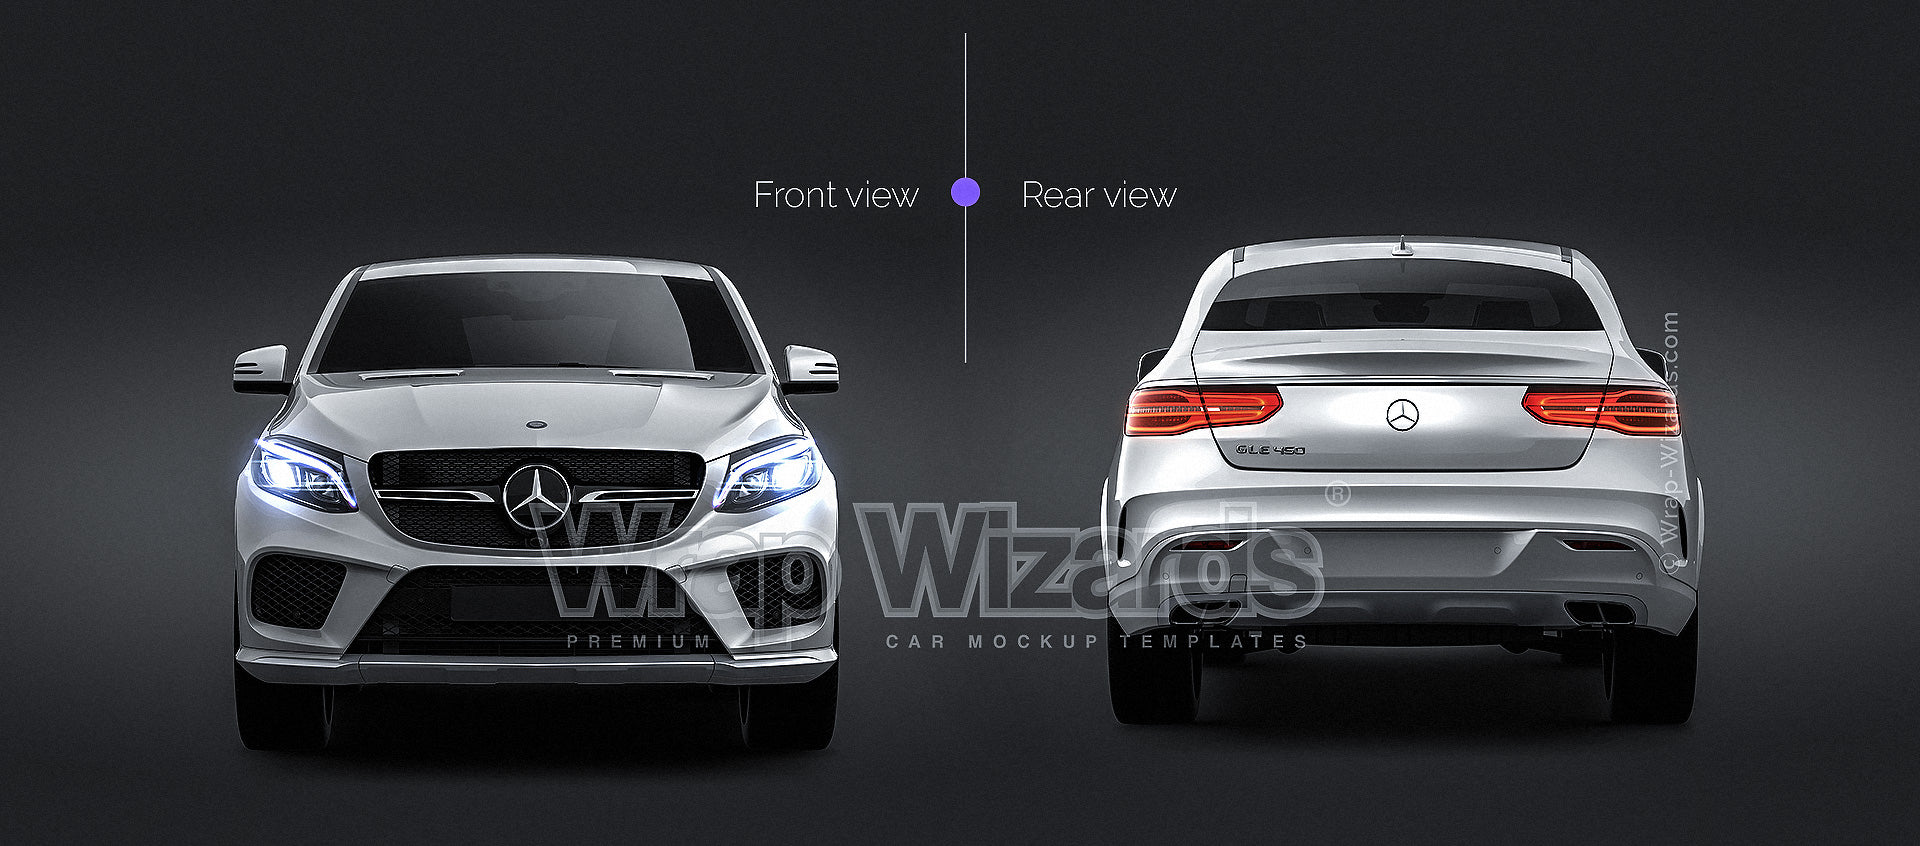 Mercedes-Benz G-Class GLE AMG Coupe 2018 - Car Mockup